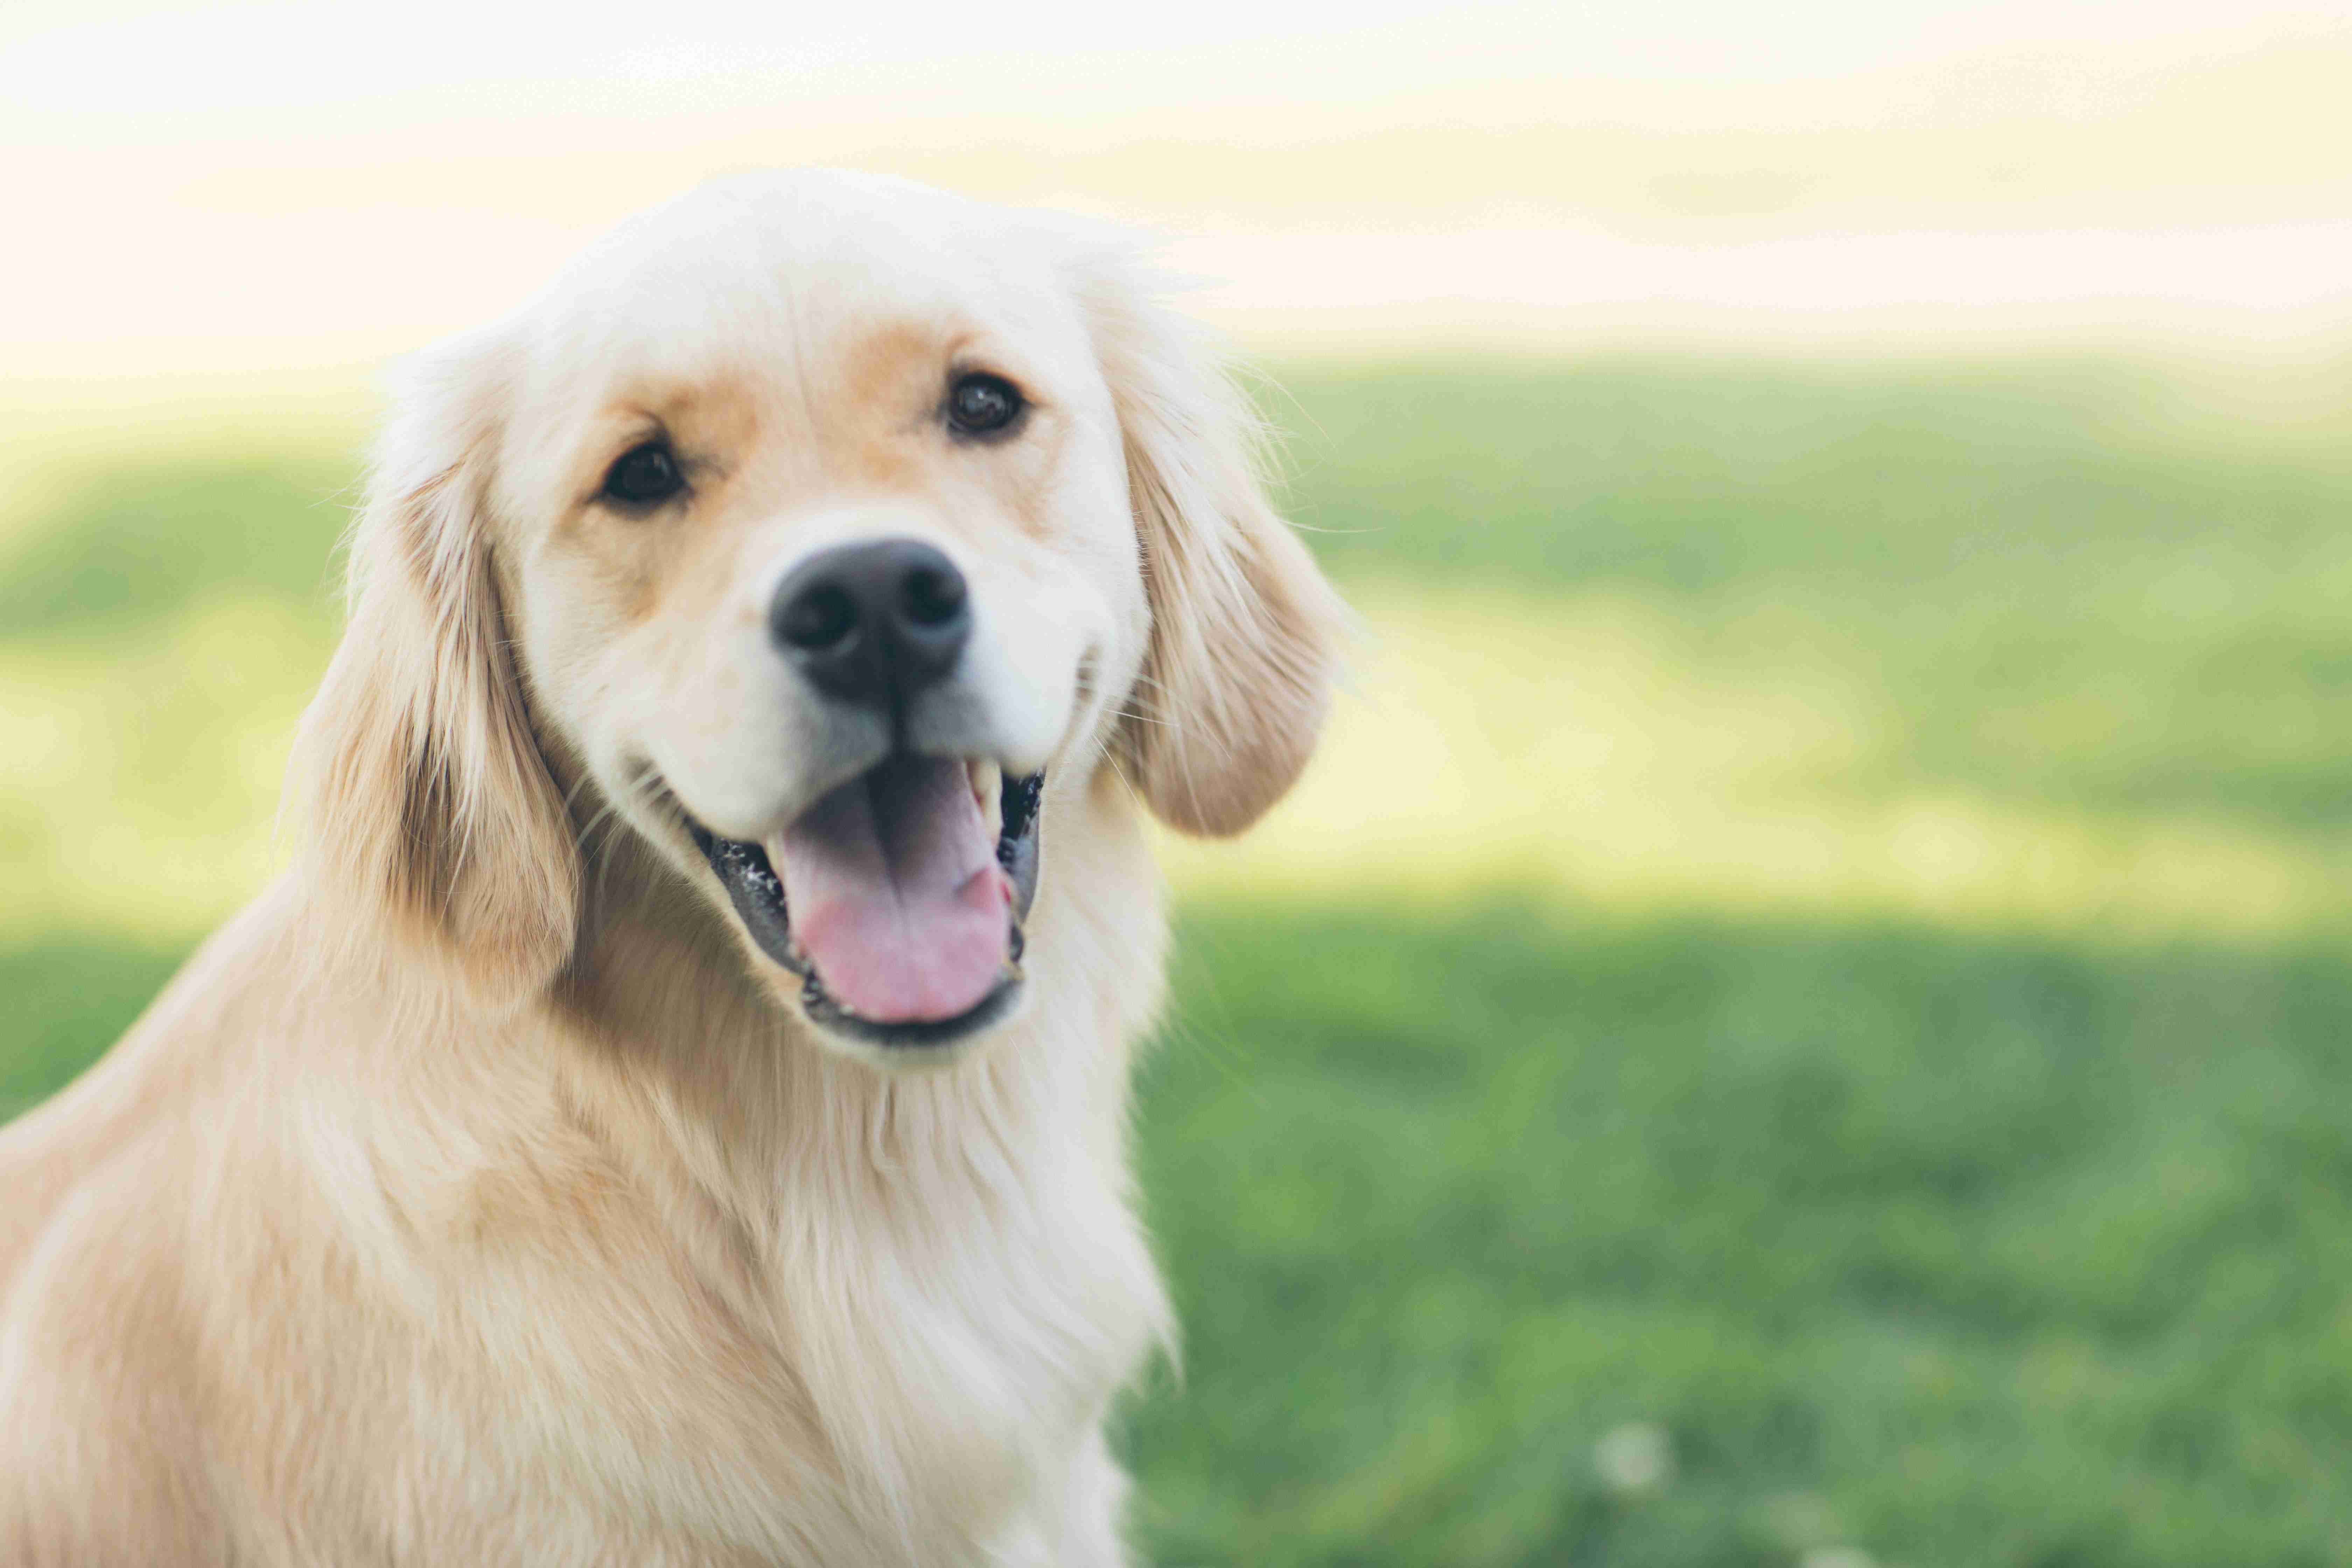 How can I prevent my Golden Retriever from chewing on furniture or belongings?